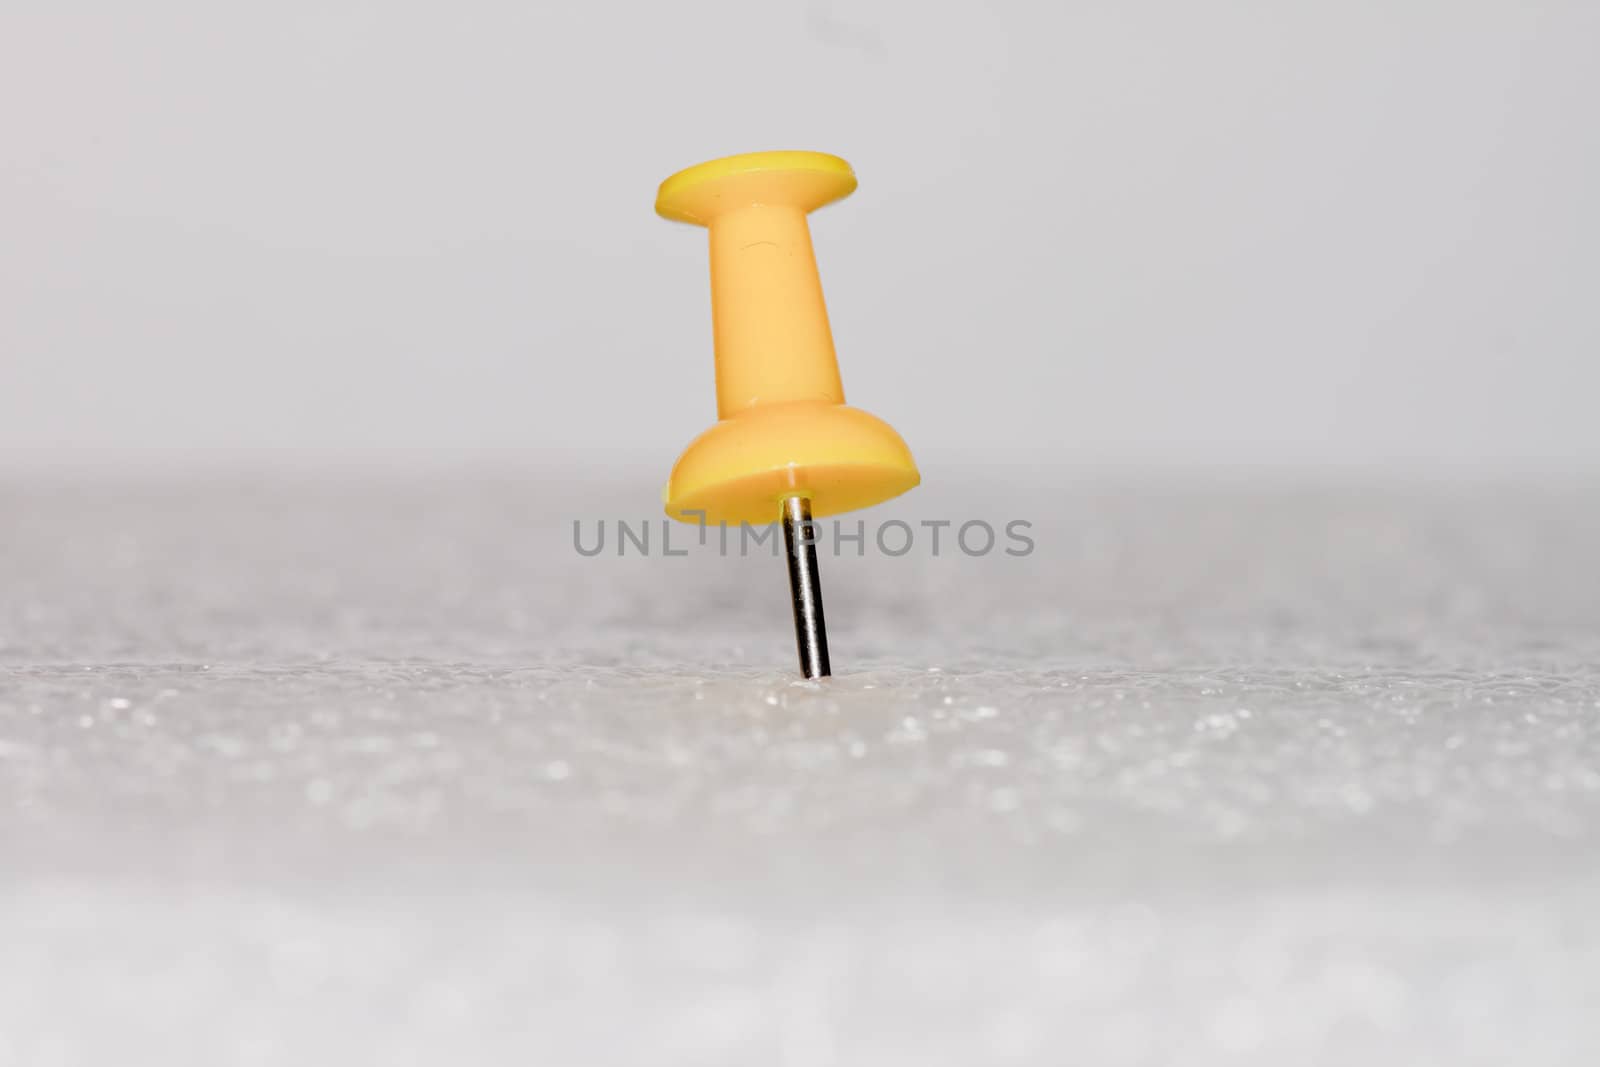 thumbtack isolated on a white background by nikky1972